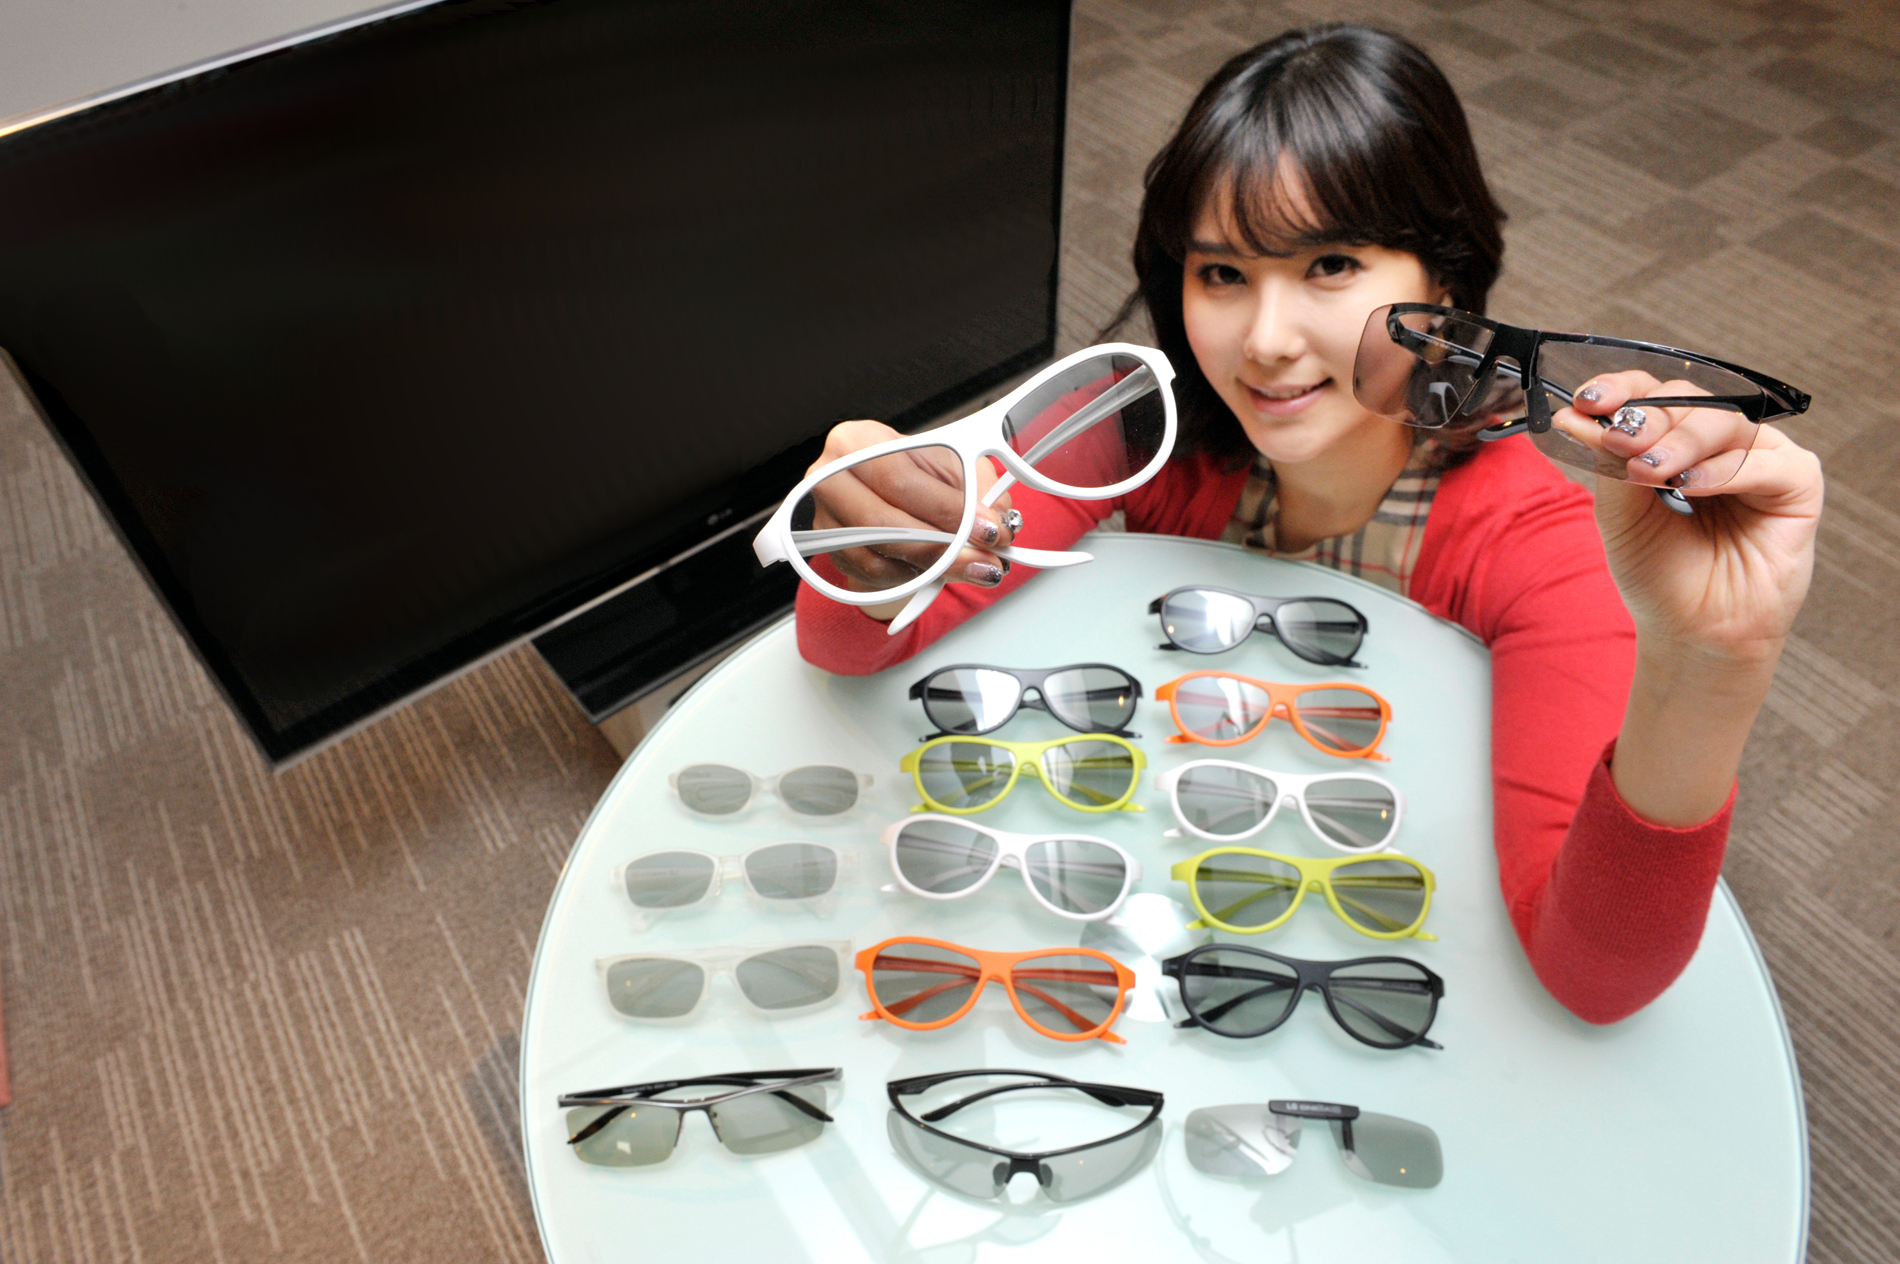 A model presenting the various types and colors of LG’s new 3D glasses lineup on a table, with the LG CINEMA 3D TV just behind her